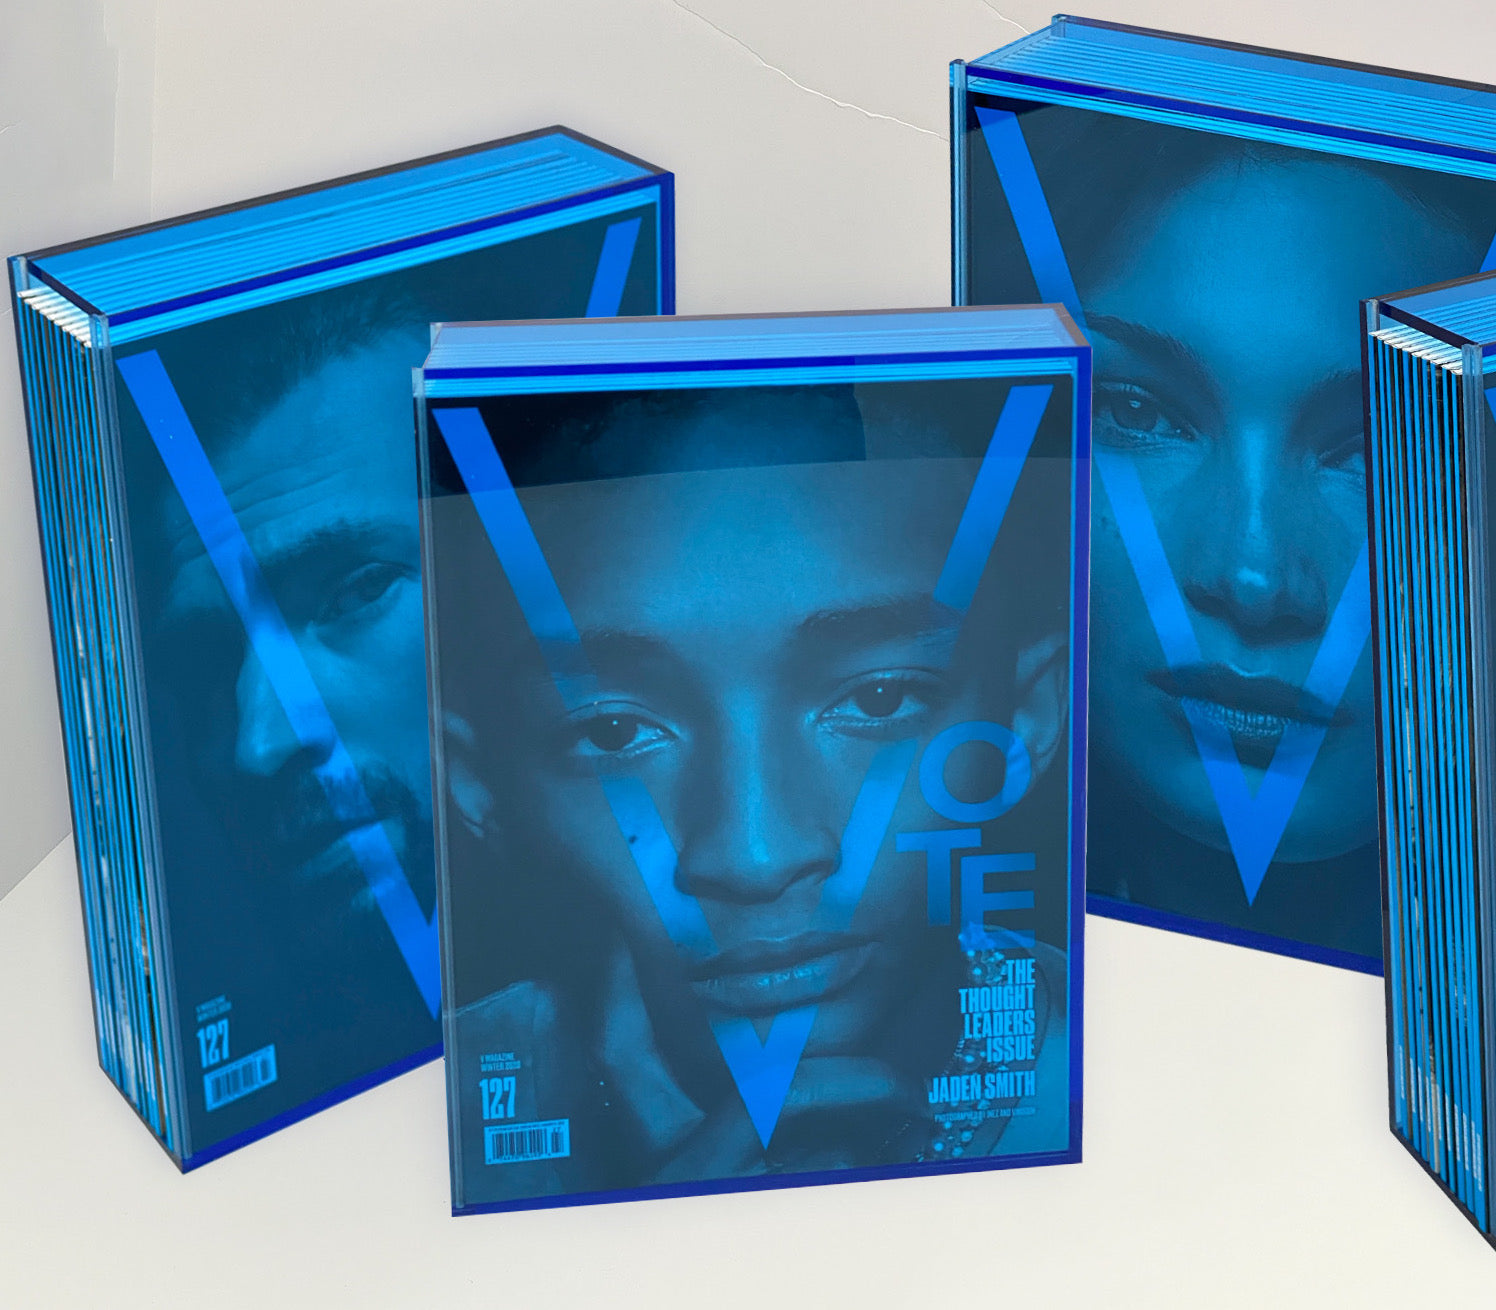 V127 "THE THOUGHT LEADERS ISSUE" LIMITED-EDITION COLLECTORS BOX SET